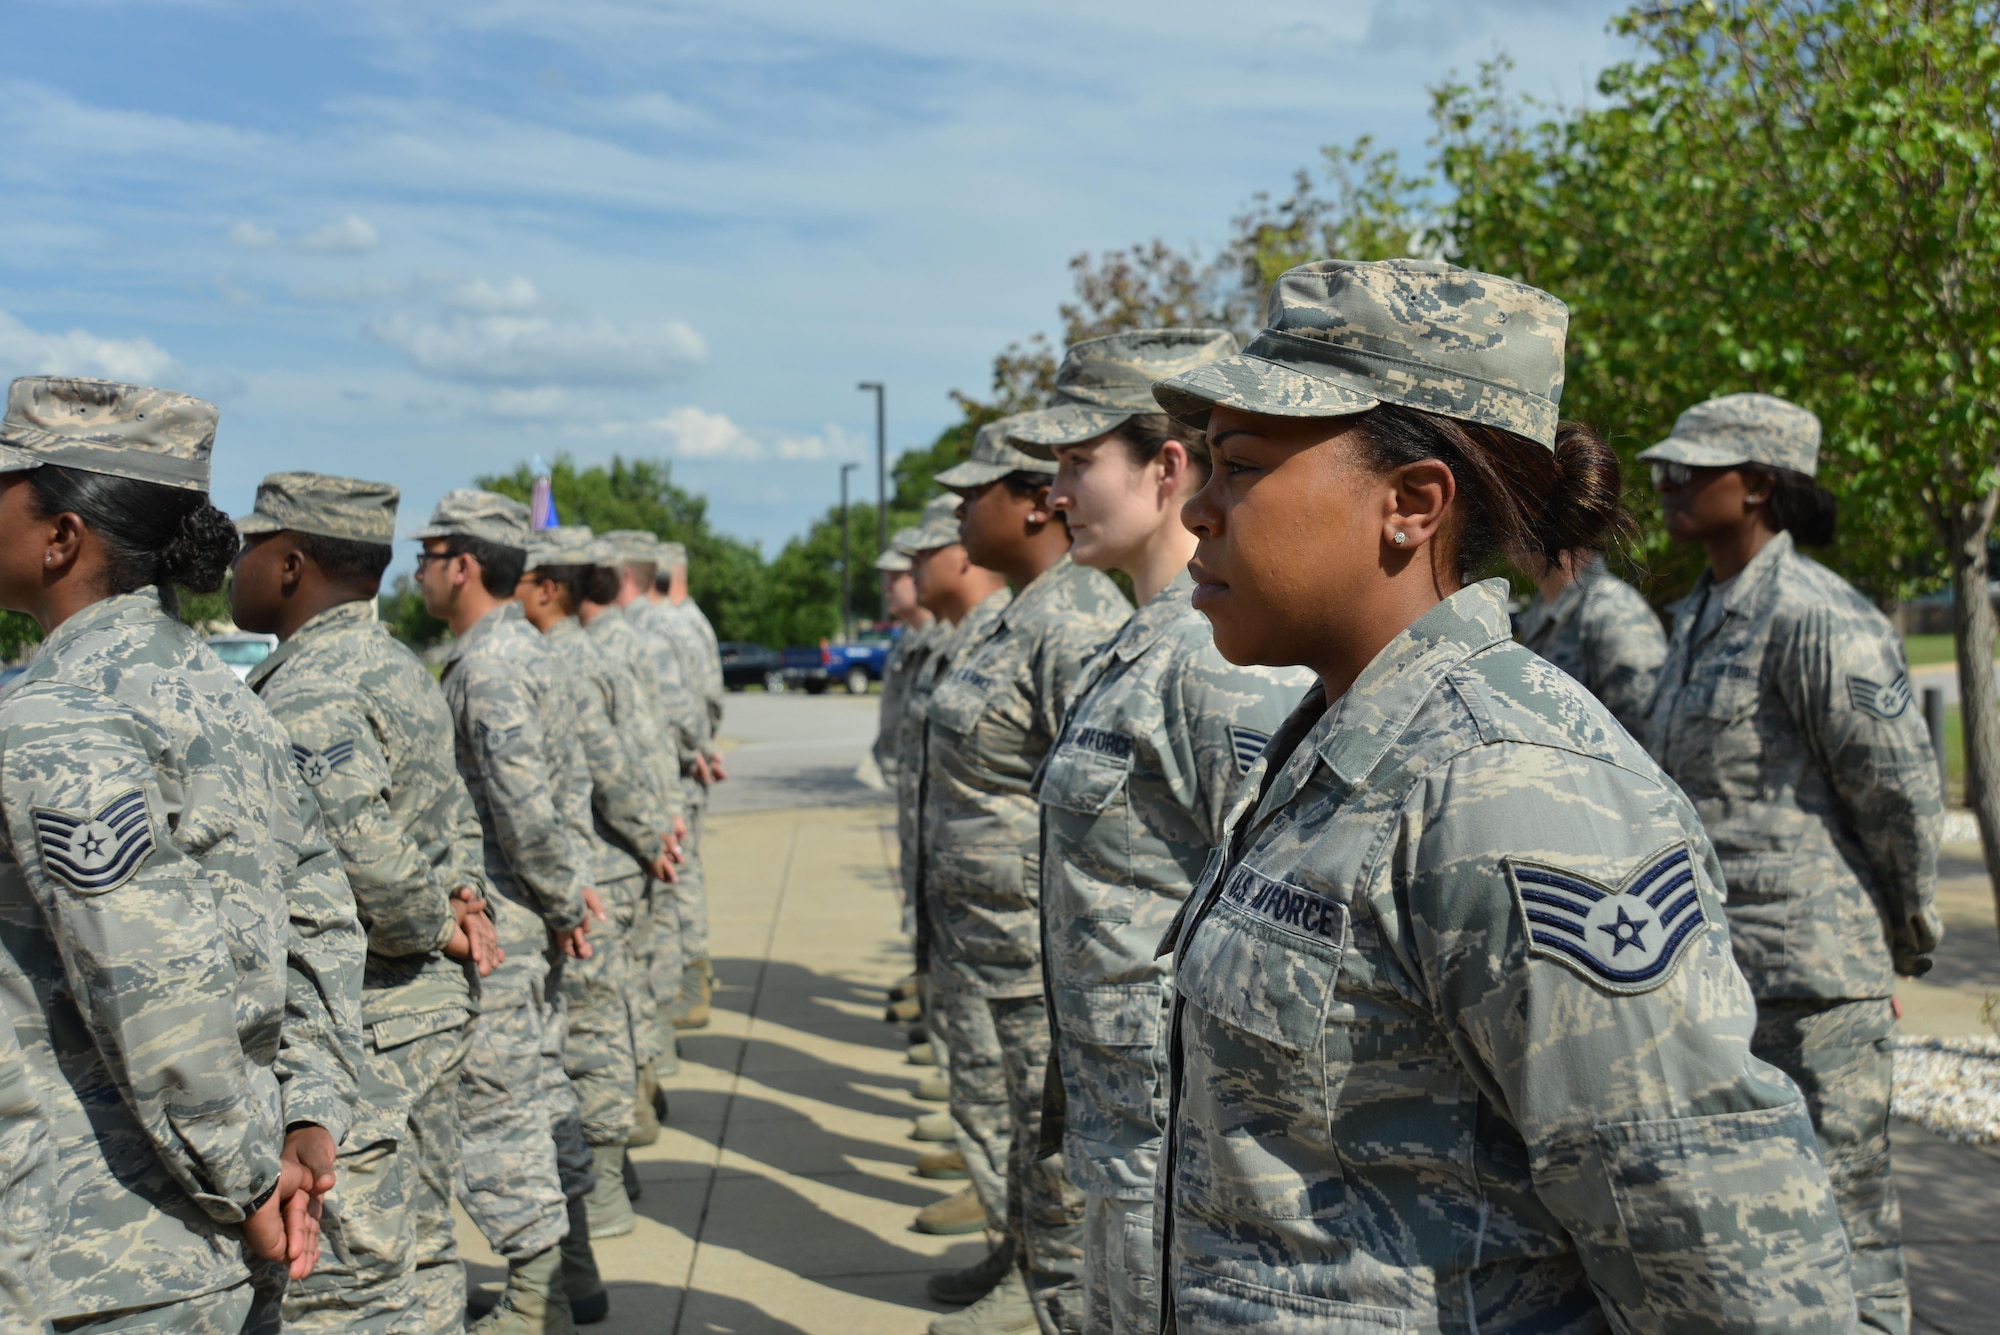 U.S. Airmen assigned to the 20th Fighter Wing (FW) stand in formation prior to a retreat ceremony at Shaw Air Force Base, S.C., June 29, 2017. The Airmen stood at attention while their wingmen in the 20th Comptroller Squadron and Wing Staff Agencies performed the retreat ceremony at the 20th FW Headquarters. (U.S. Air Force photo by Airman 1st Class Destinee Sweeney)